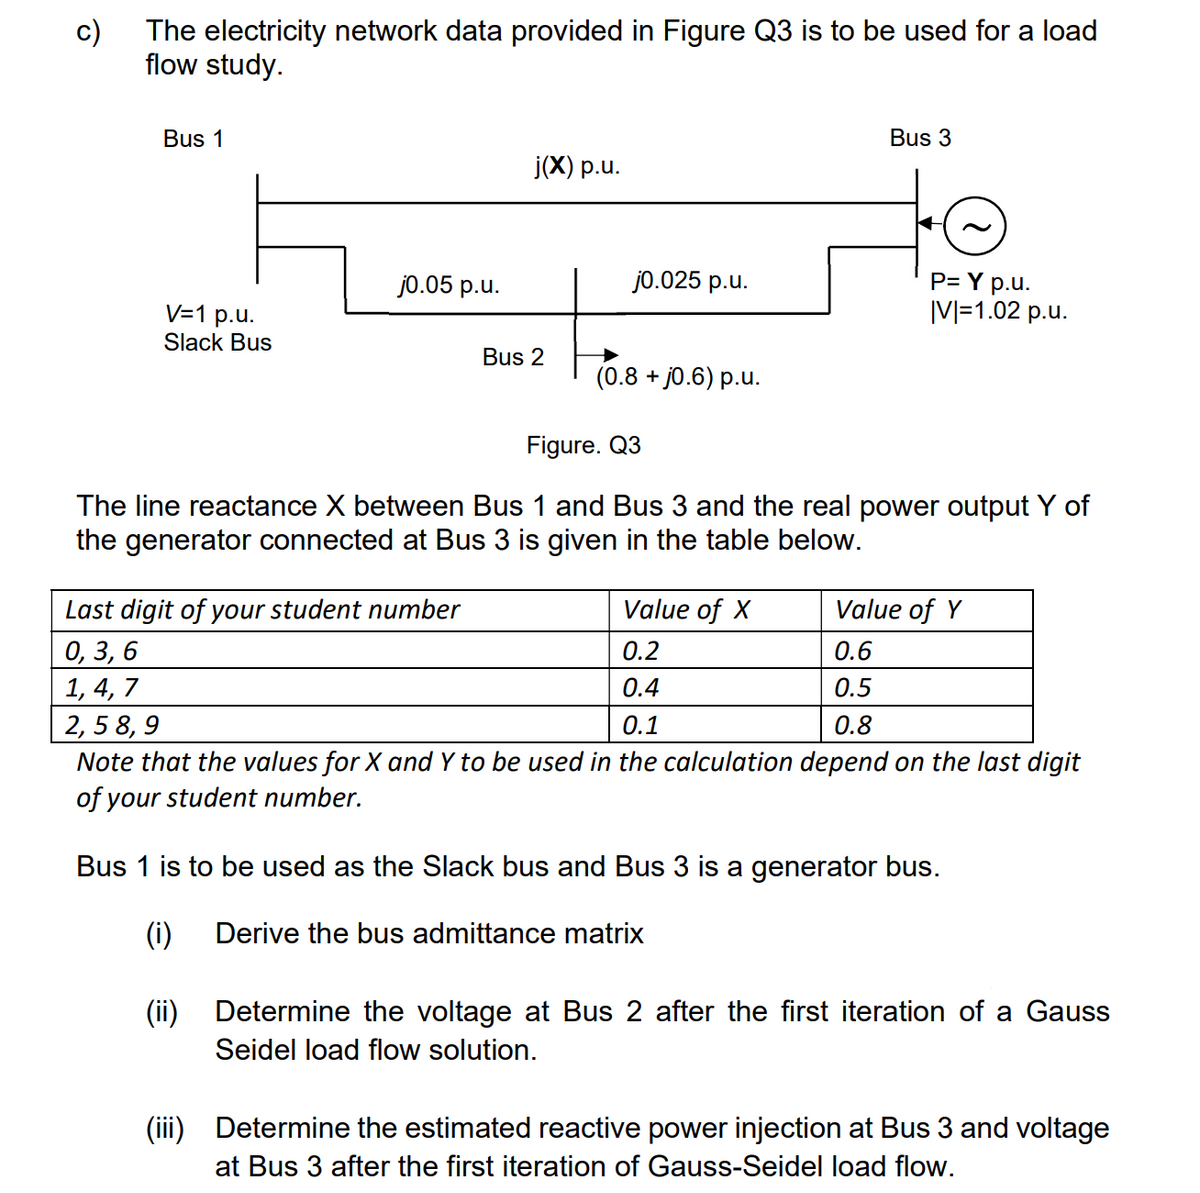 c)
The electricity network data provided in Figure Q3 is to be used for a load
flow study.
Bus 1
V=1 p.u.
Slack Bus
jo.05 p.u.
j(x) p.u.
Last digit of your student number
0, 3, 6
1,4,7
Bus 2
j0.025 p.u.
(0.8 + j0.6) p.u.
Bus 3
P= Y p.u.
|VI=1.02 p.u.
Figure. Q3
The line reactance X between Bus 1 and Bus 3 and the real power output Y of
the generator connected at Bus 3 is given in the table below.
Value of X
Value of Y
0.2
0.6
0.4
0.5
2,58,9
0.1
0.8
Note that the values for X and Y to be used in the calculation depend on the last digit
of your student number.
Bus 1 is to be used as the Slack bus and Bus 3 is a generator bus.
(i)
Derive the bus admittance matrix
(ii)
Determine the voltage at Bus 2 after the first iteration of a Gauss
Seidel load flow solution.
(iii) Determine the estimated reactive power injection at Bus 3 and voltage
at Bus 3 after the first iteration of Gauss-Seidel load flow.